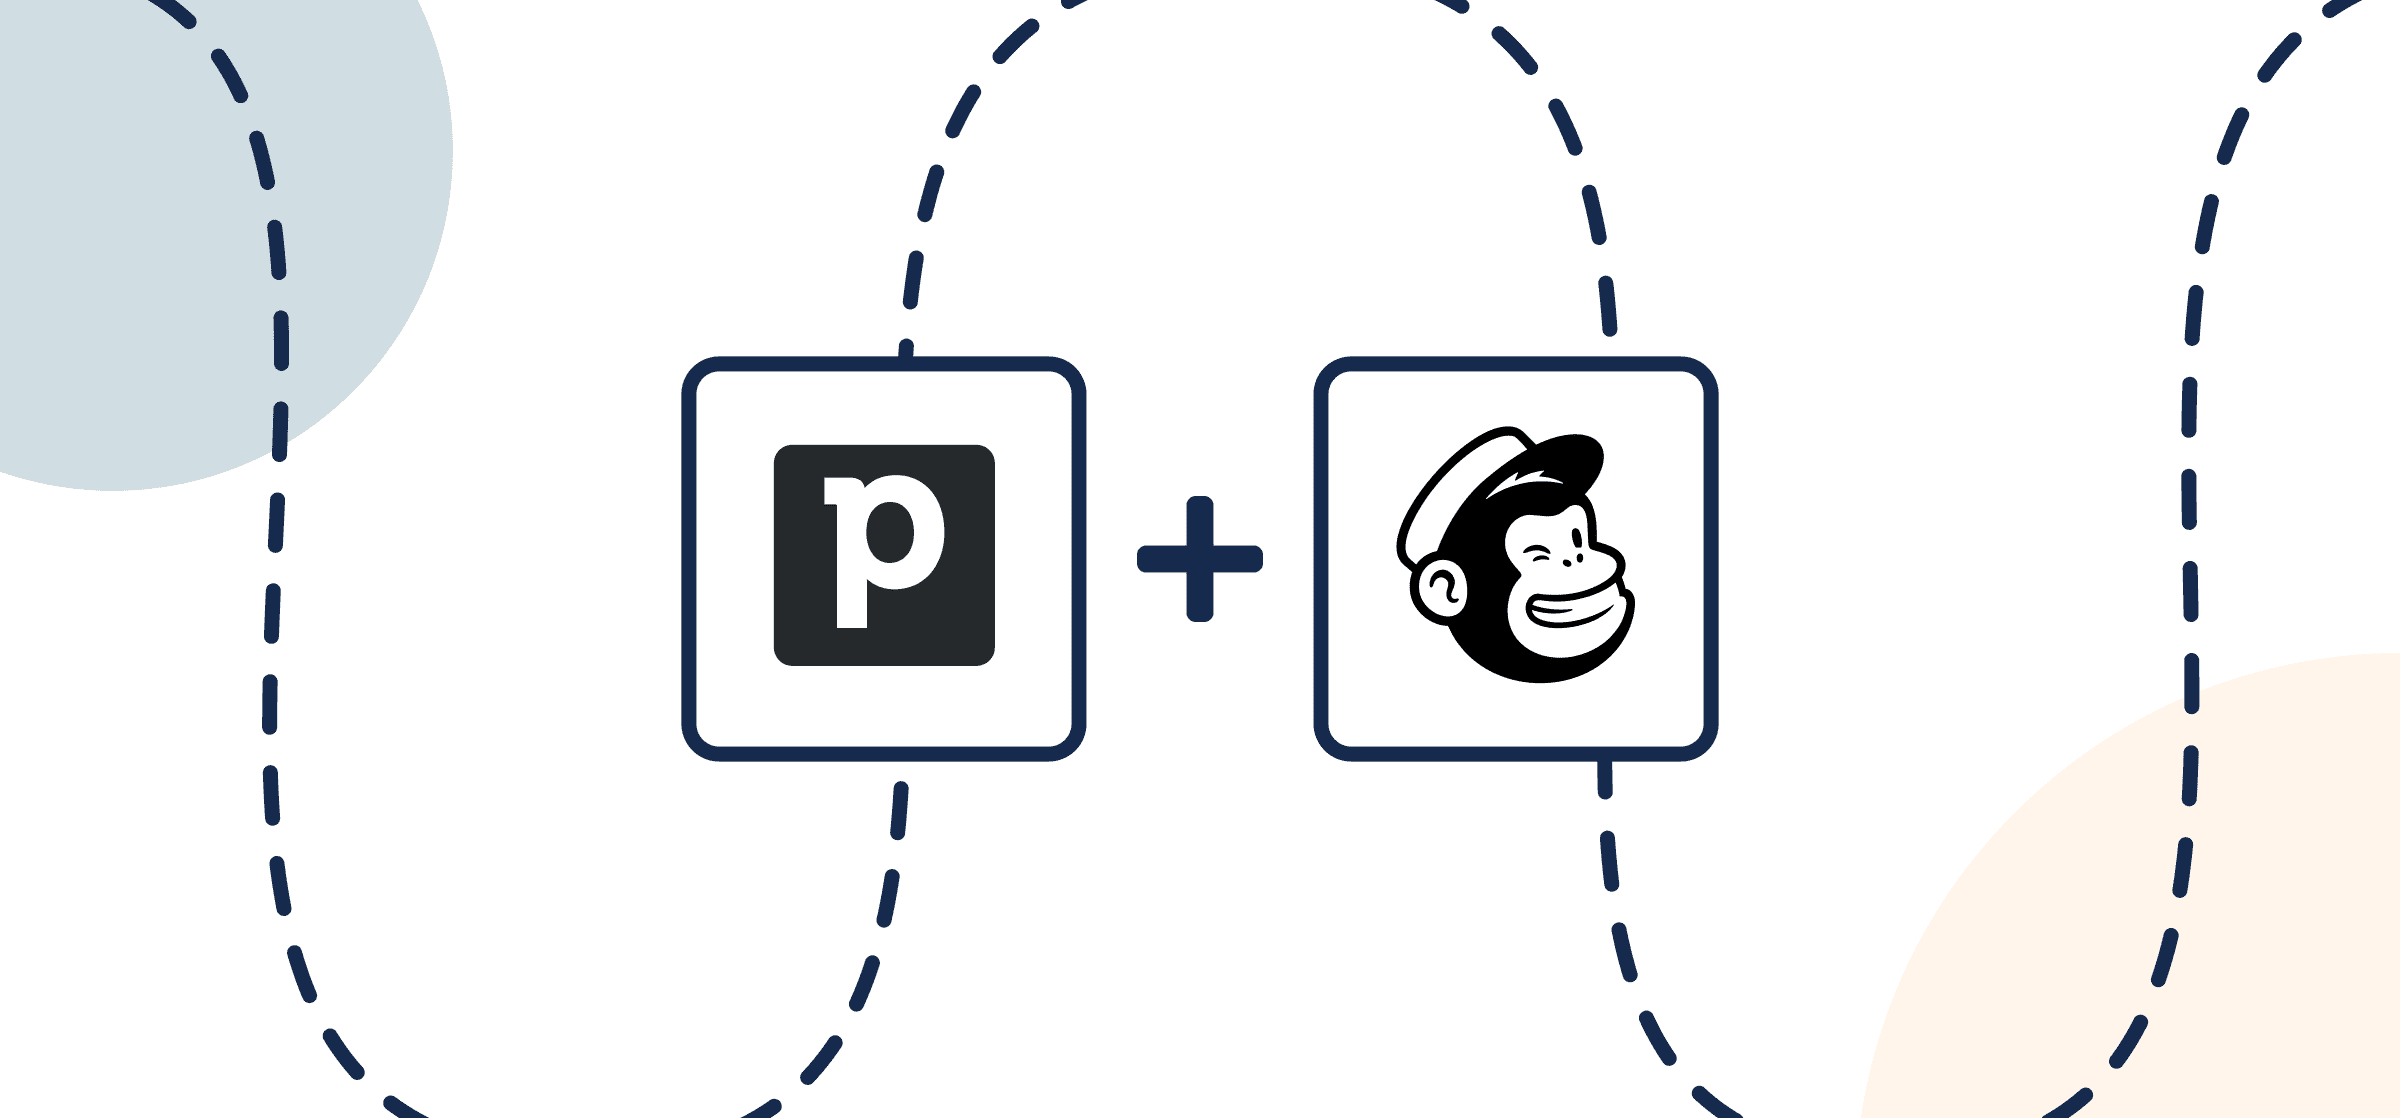 Featured image displaying the logos of Pipedrive and Mailchimp in Unito's guide to setting up a simple Two-Way Sync